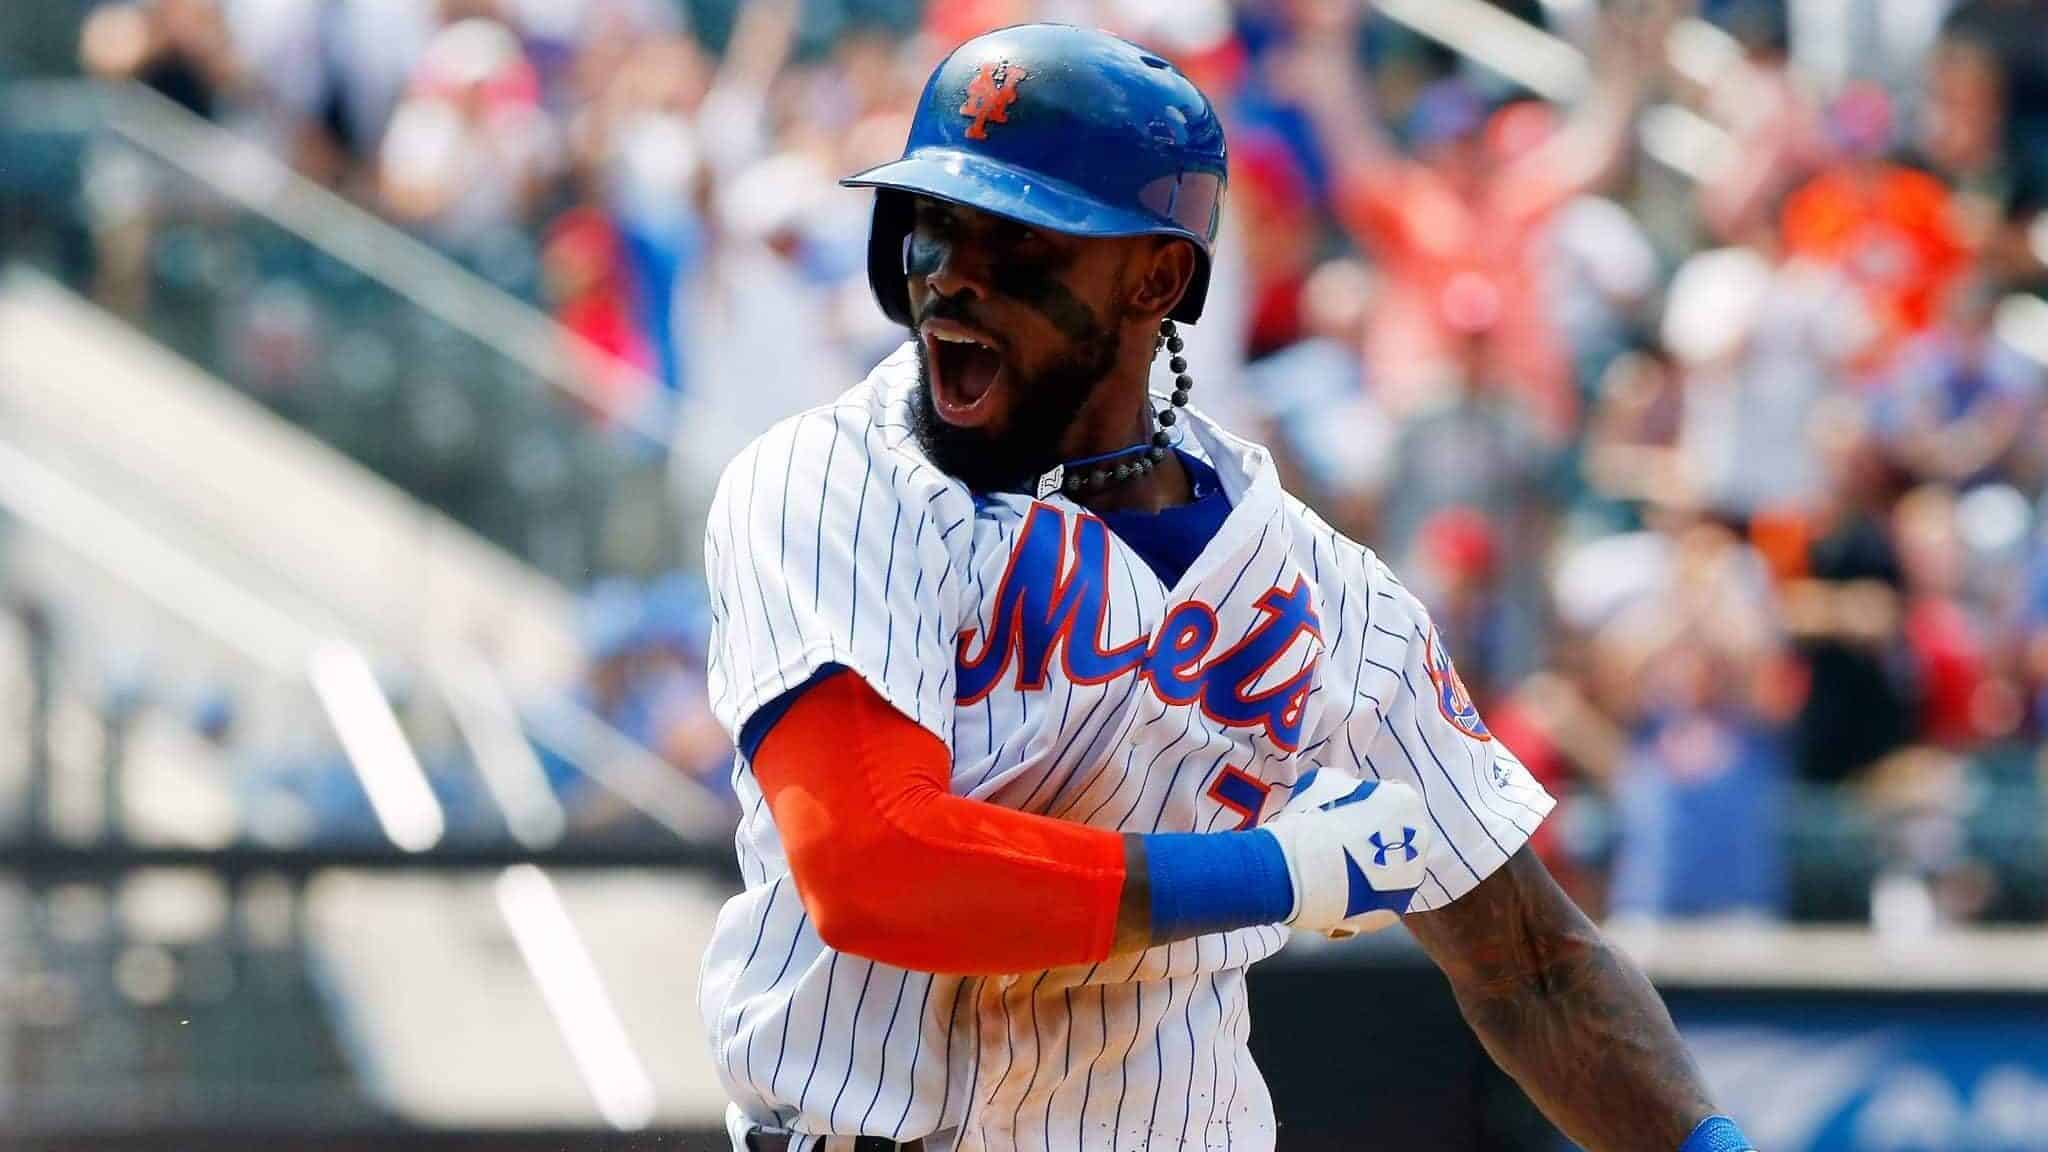 NEW YORK, NY - JULY 20: Jose Reyes #7 of the New York Mets celebrates his ninth inning game-winning infield base hit against the St. Louis Cardinals on July 20, 2017 at Citi Field in the Flushing neighborhood of the Queens borough of New York City.